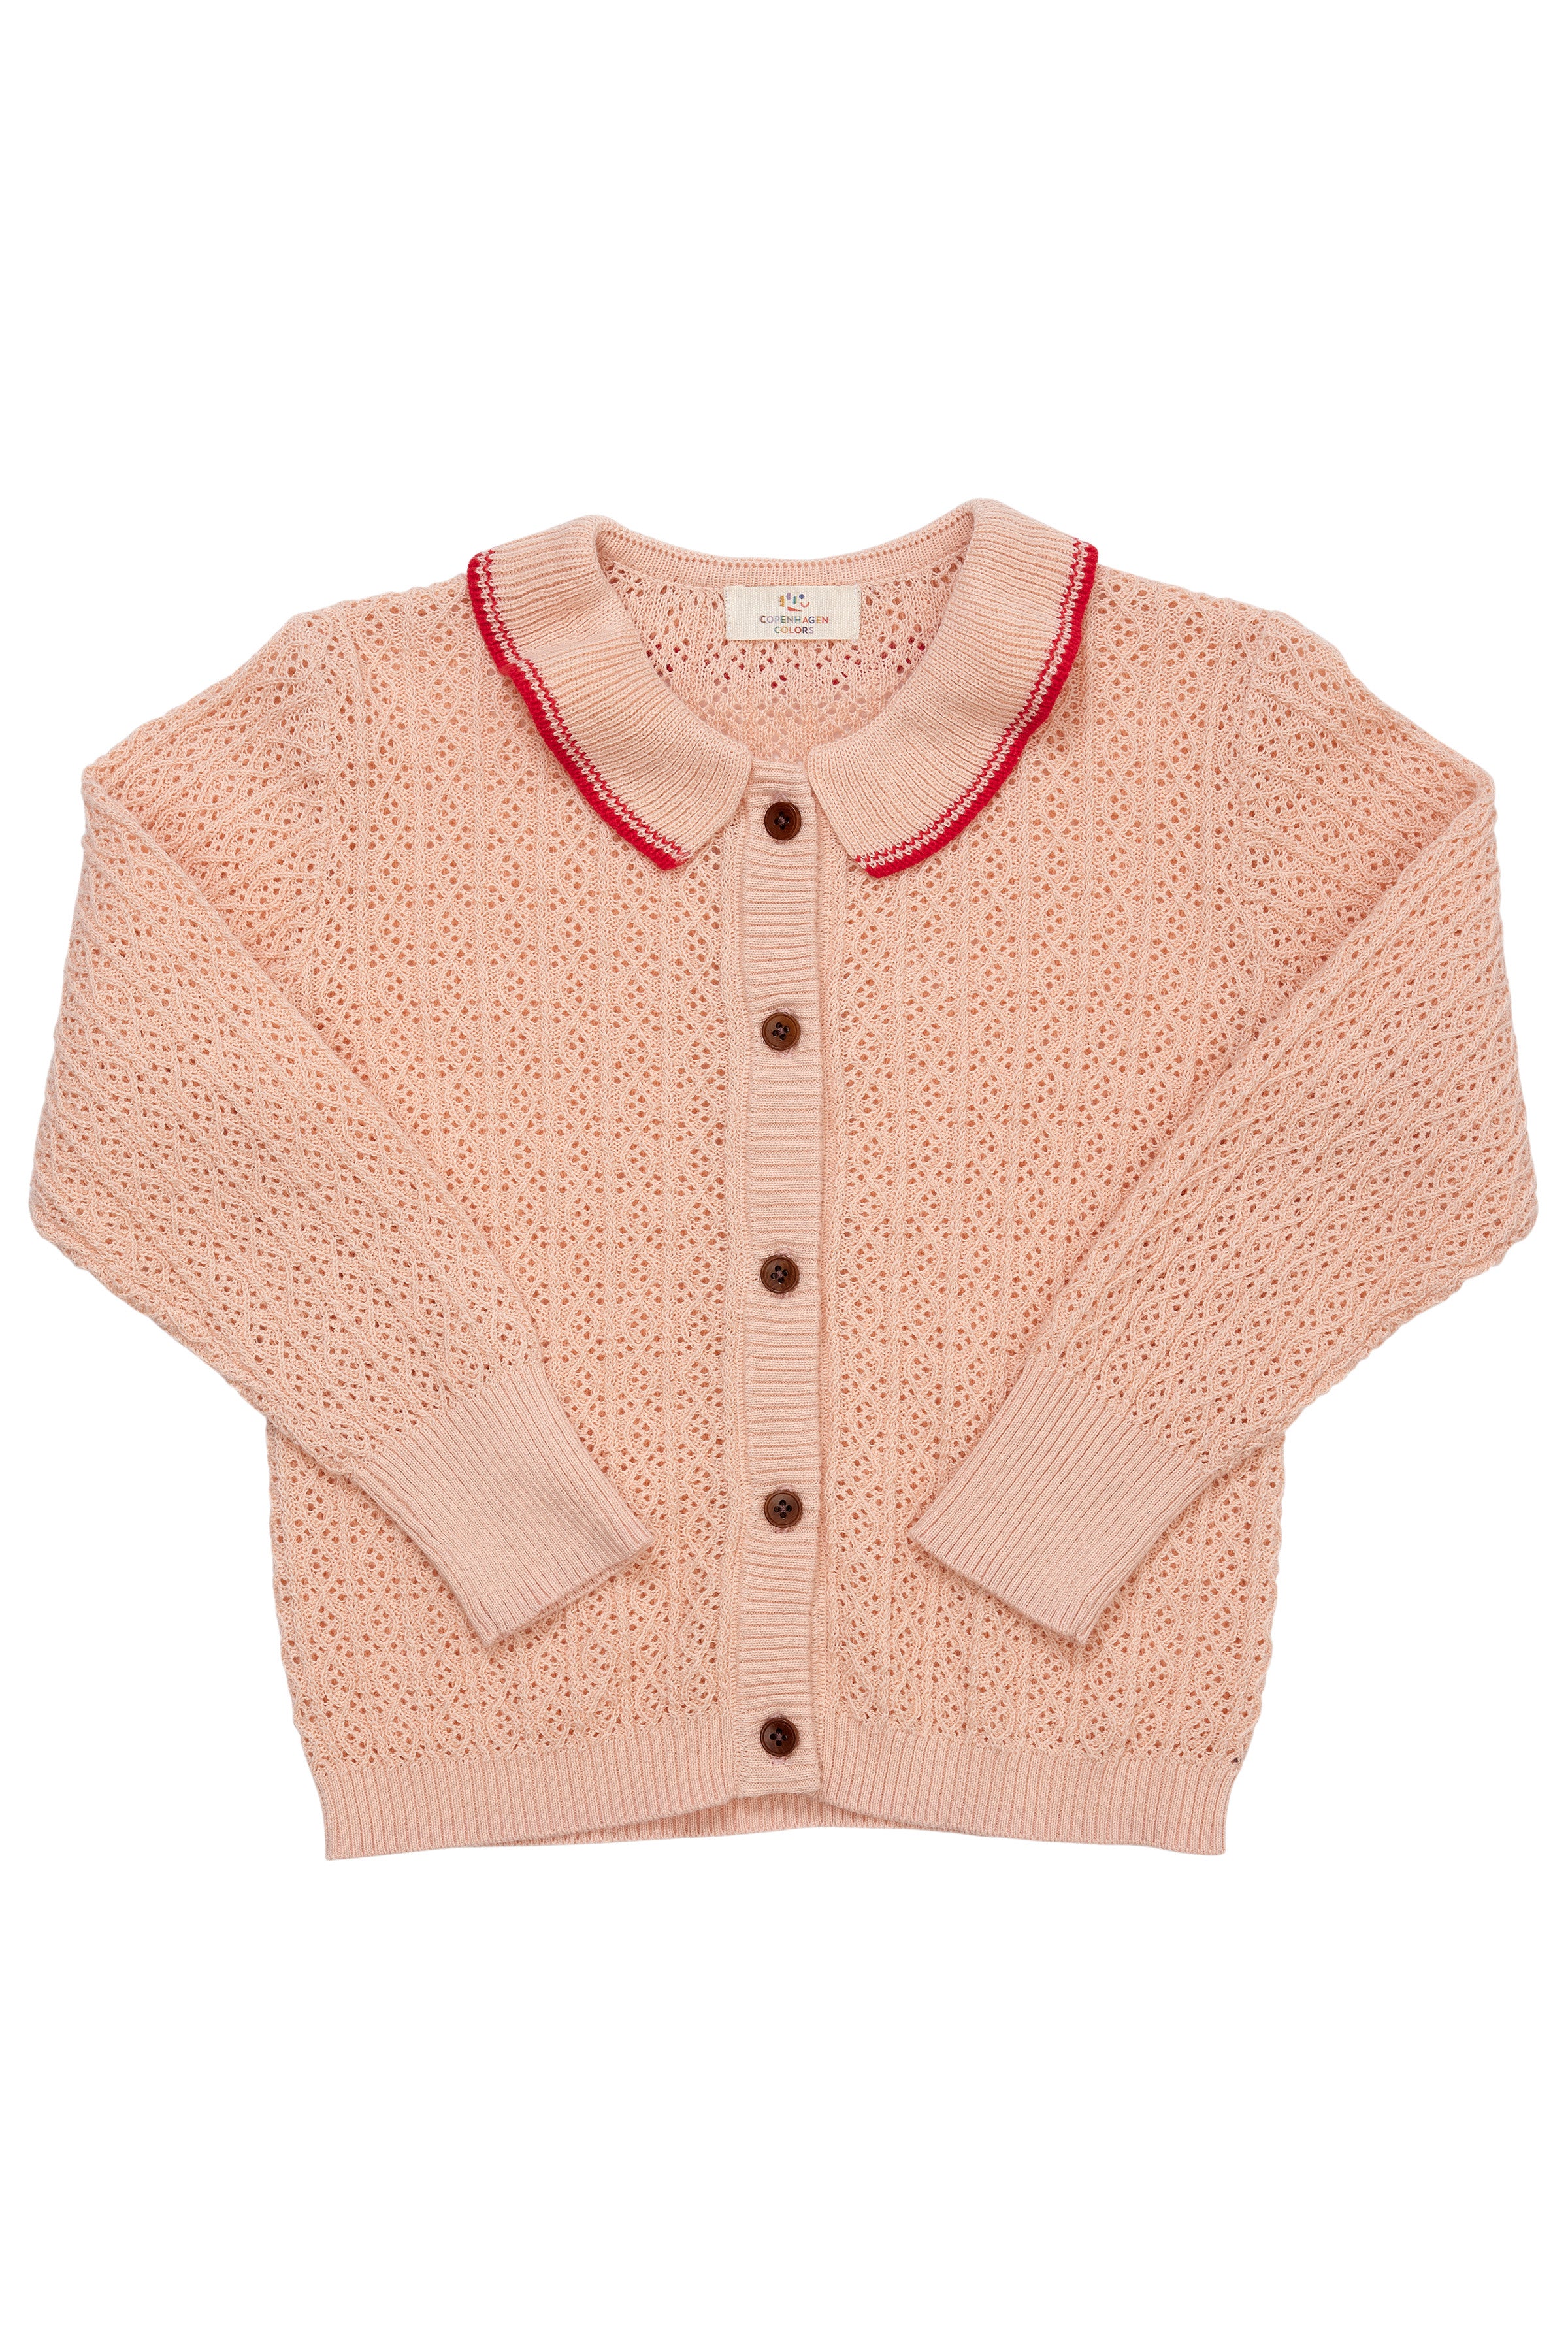 COPENHAGEN COLORS / POINTELLE KNITTED CABLE CARDIGAN - ROSE/RED